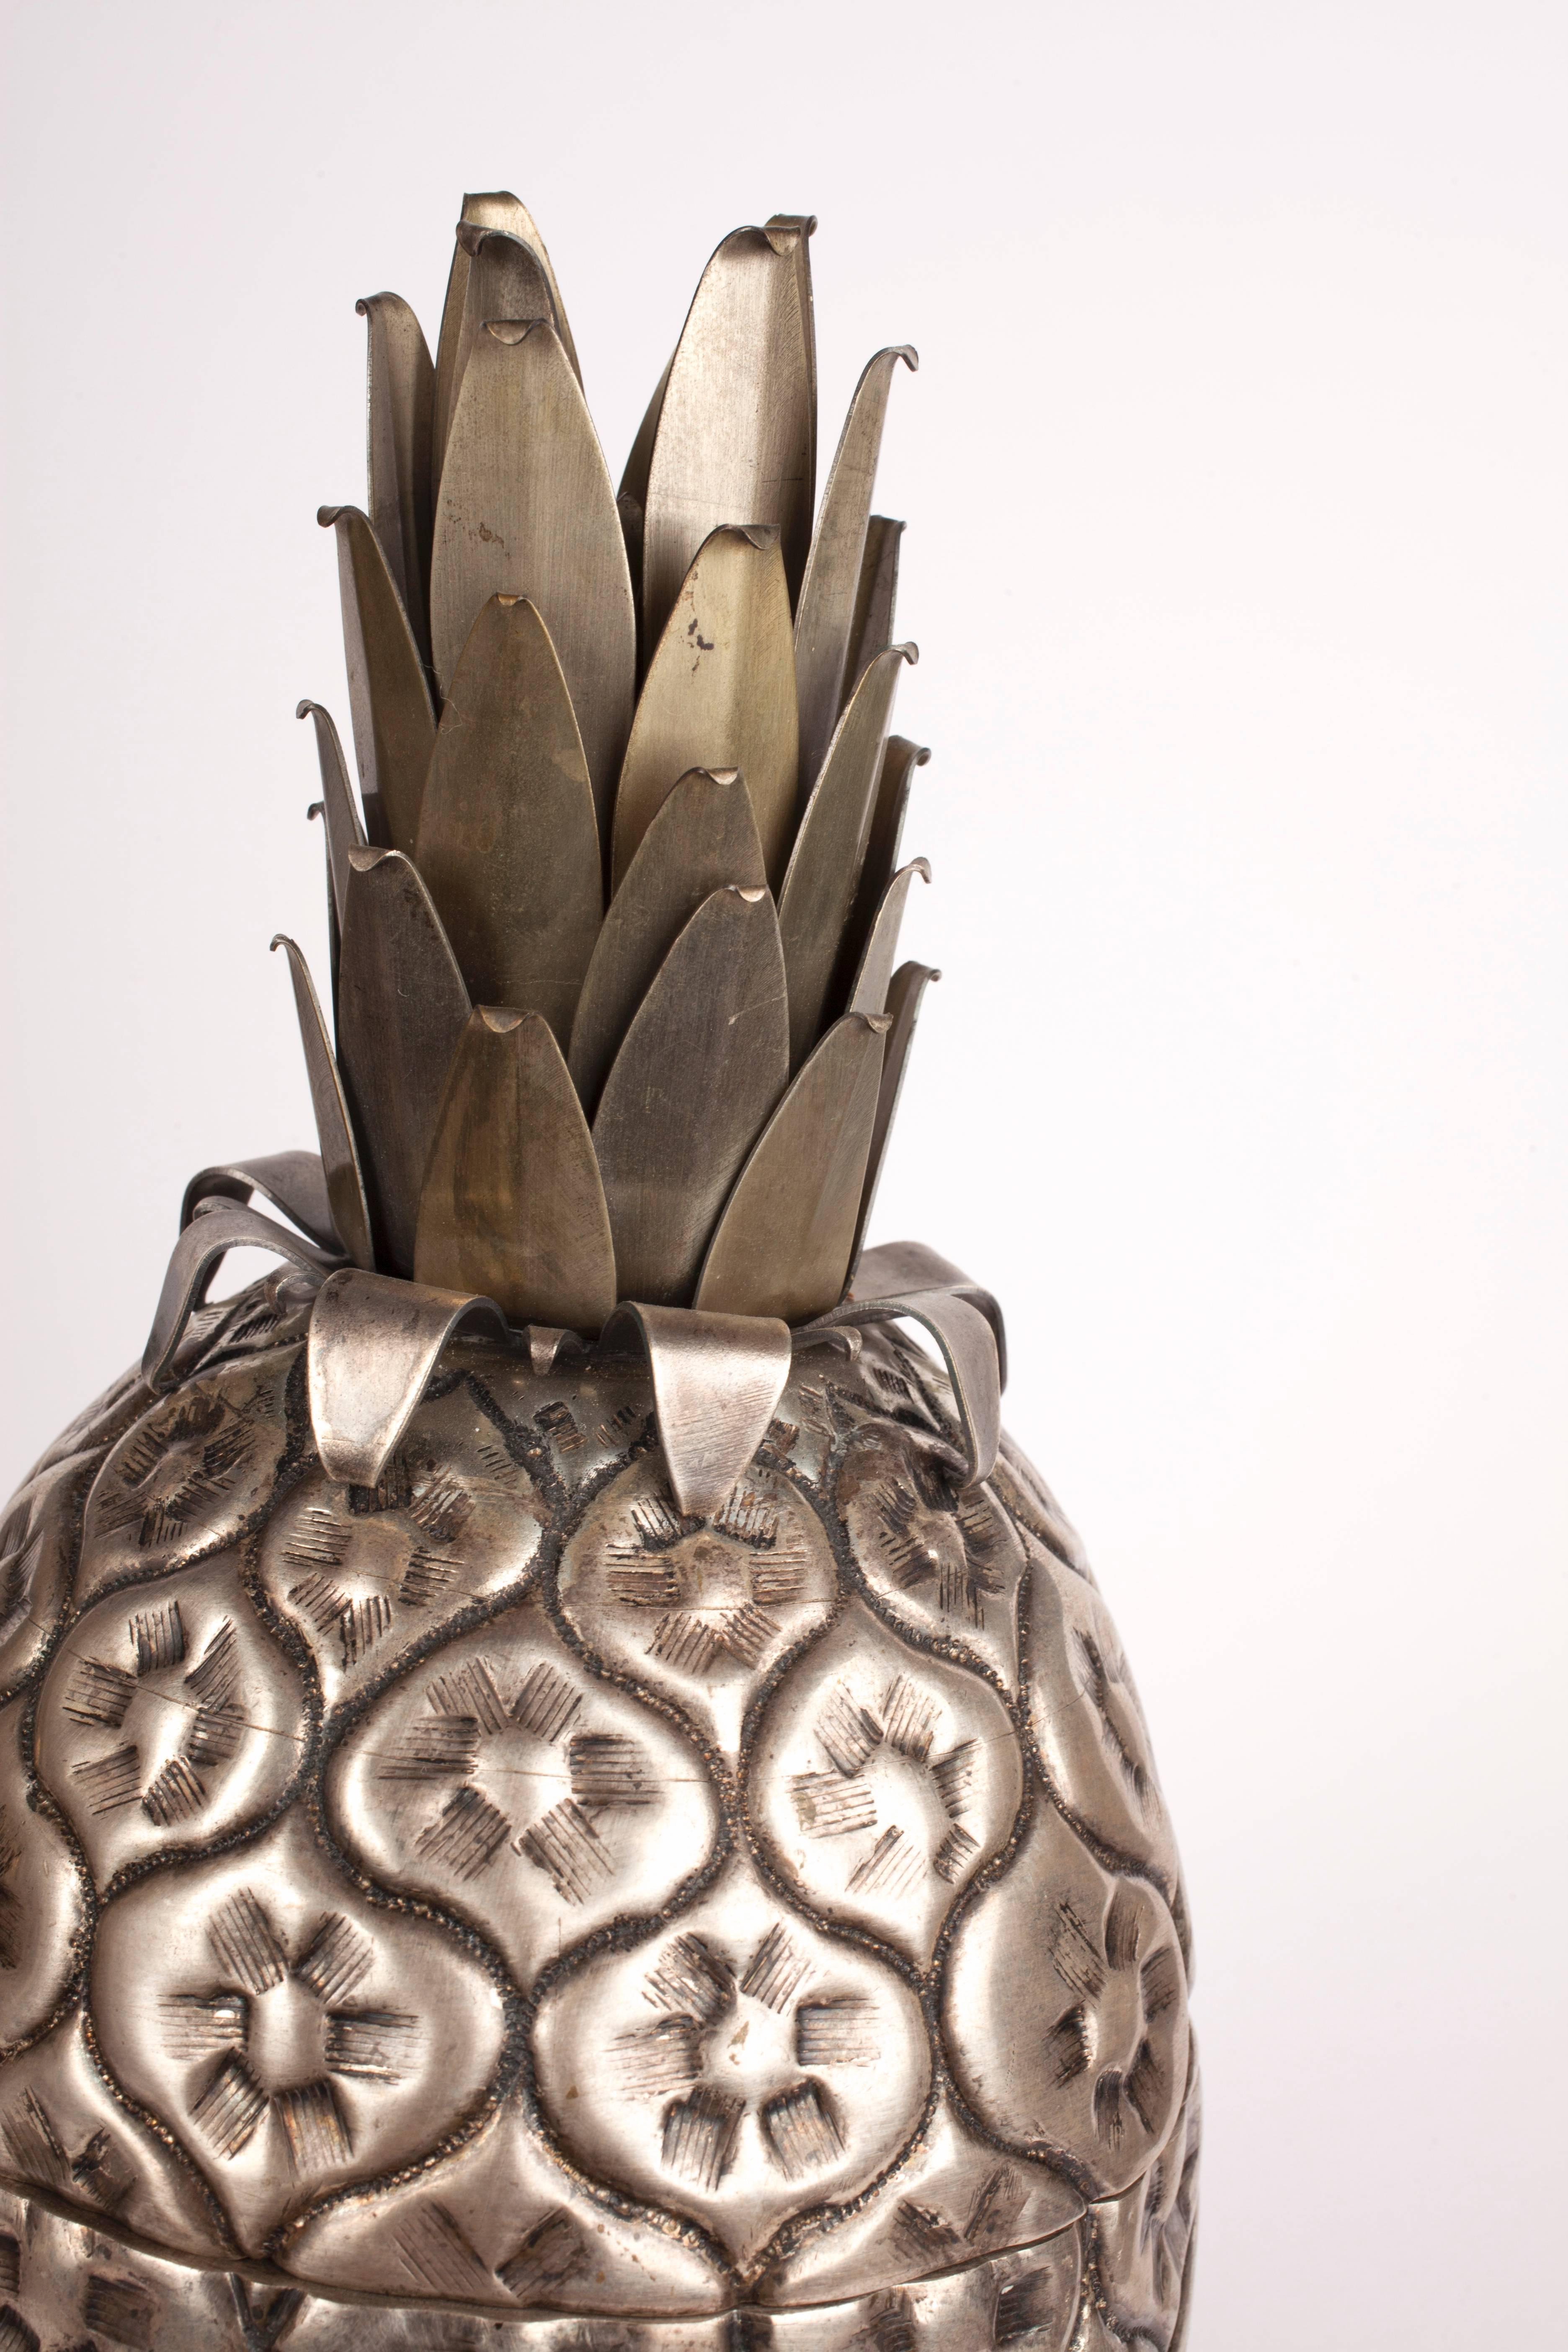 This pineapple ice bucket is what we like to think of as a functional work of art, it sexquisitely beautiful with a wonderfully detailed body and almost brutalist formed fronds. Strongly believed to be Italian and by Mauro Manetti but unsigned.